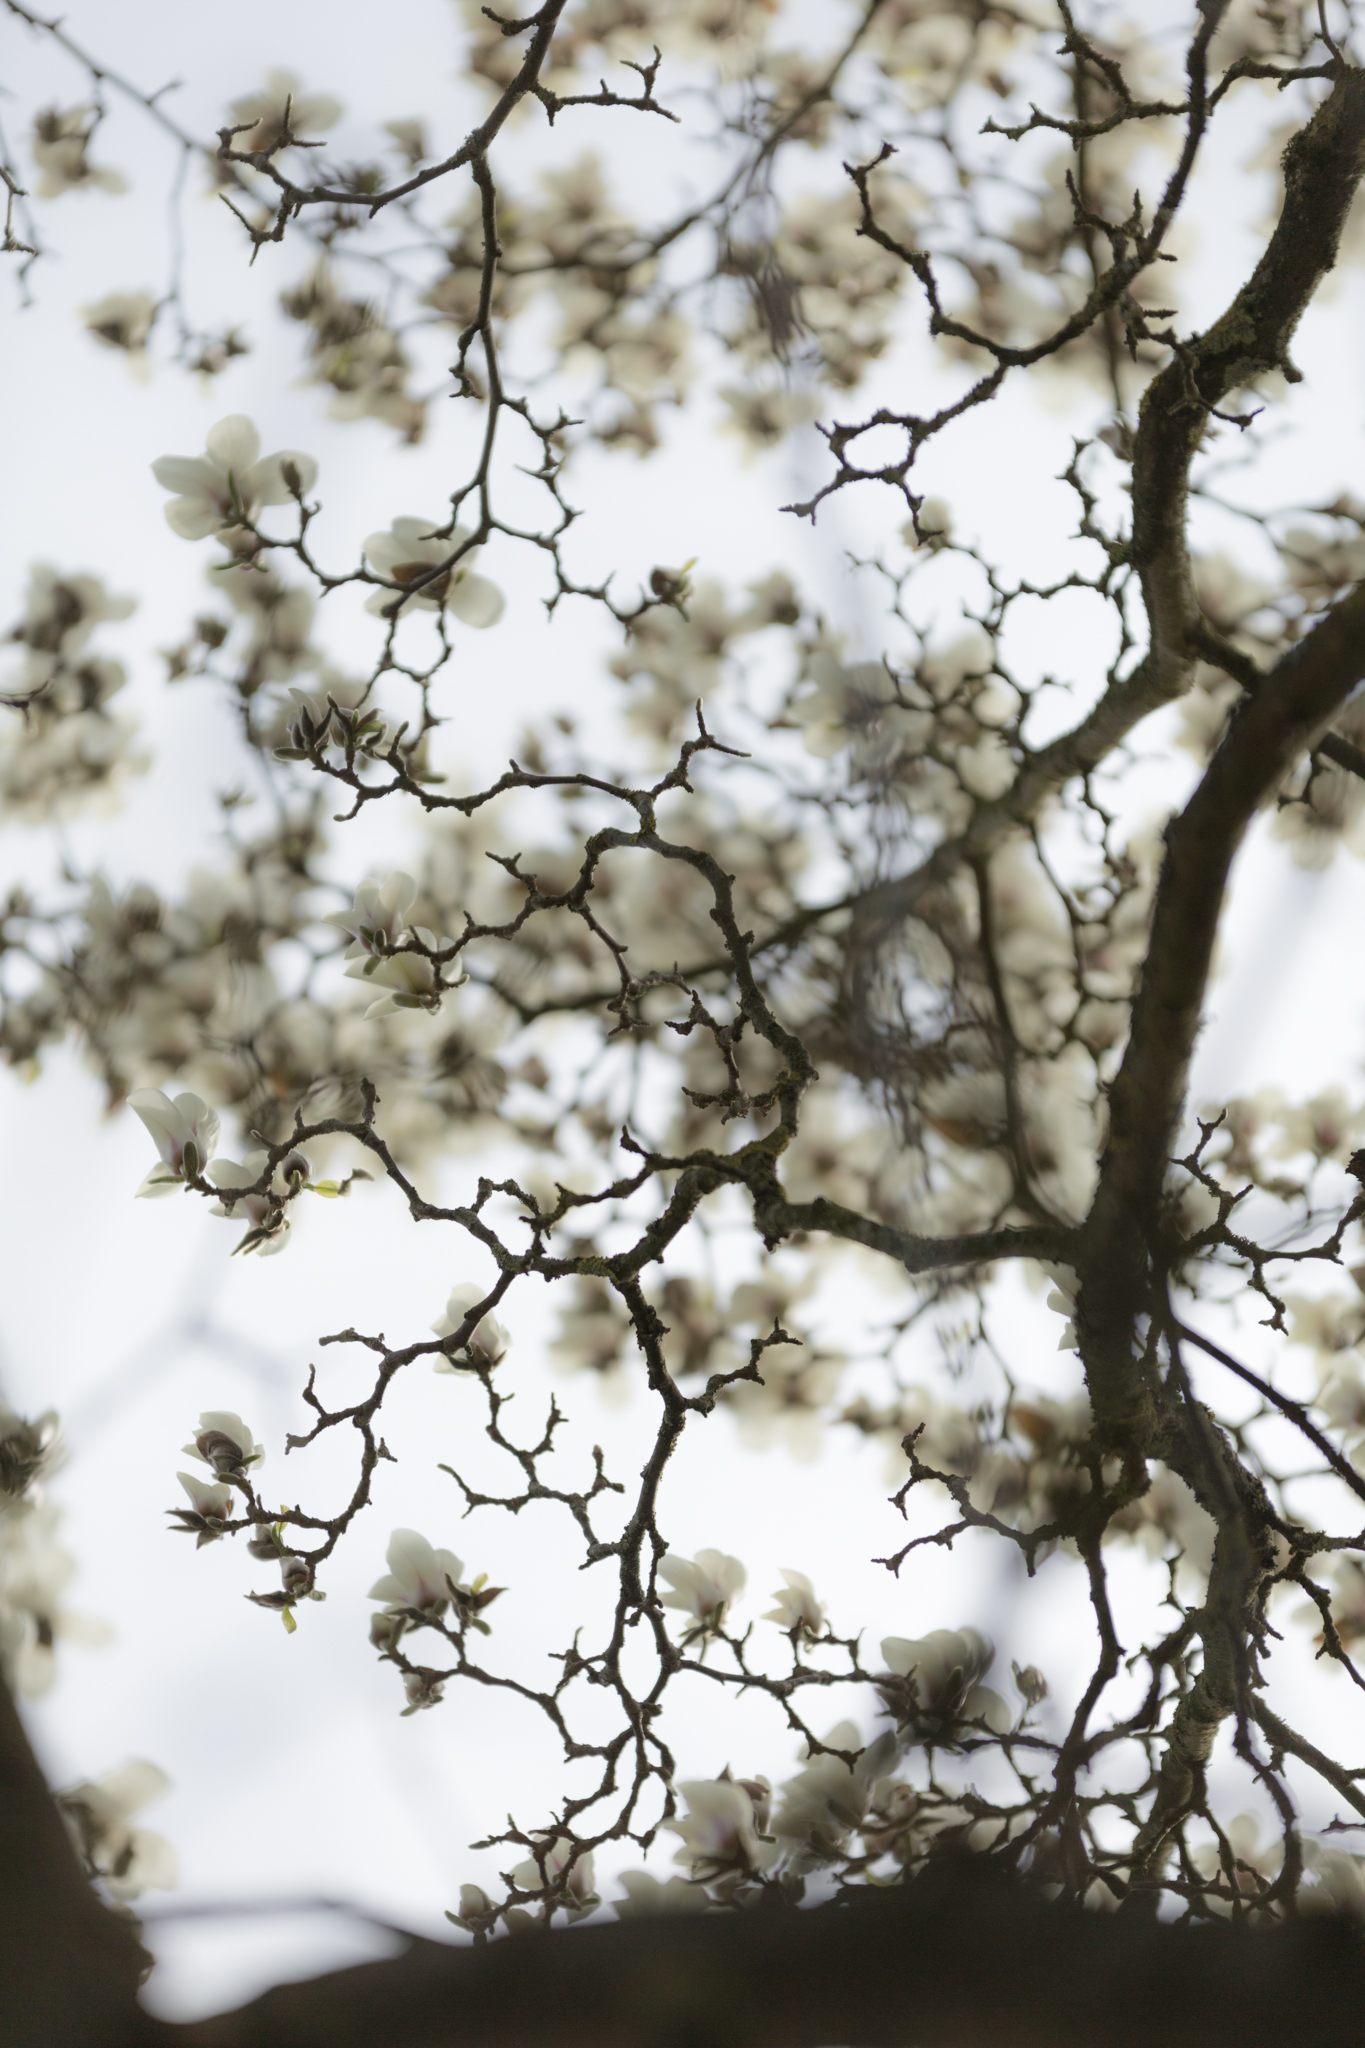 Photo: Lace and bath foam - Magnolia and cherries in bloom